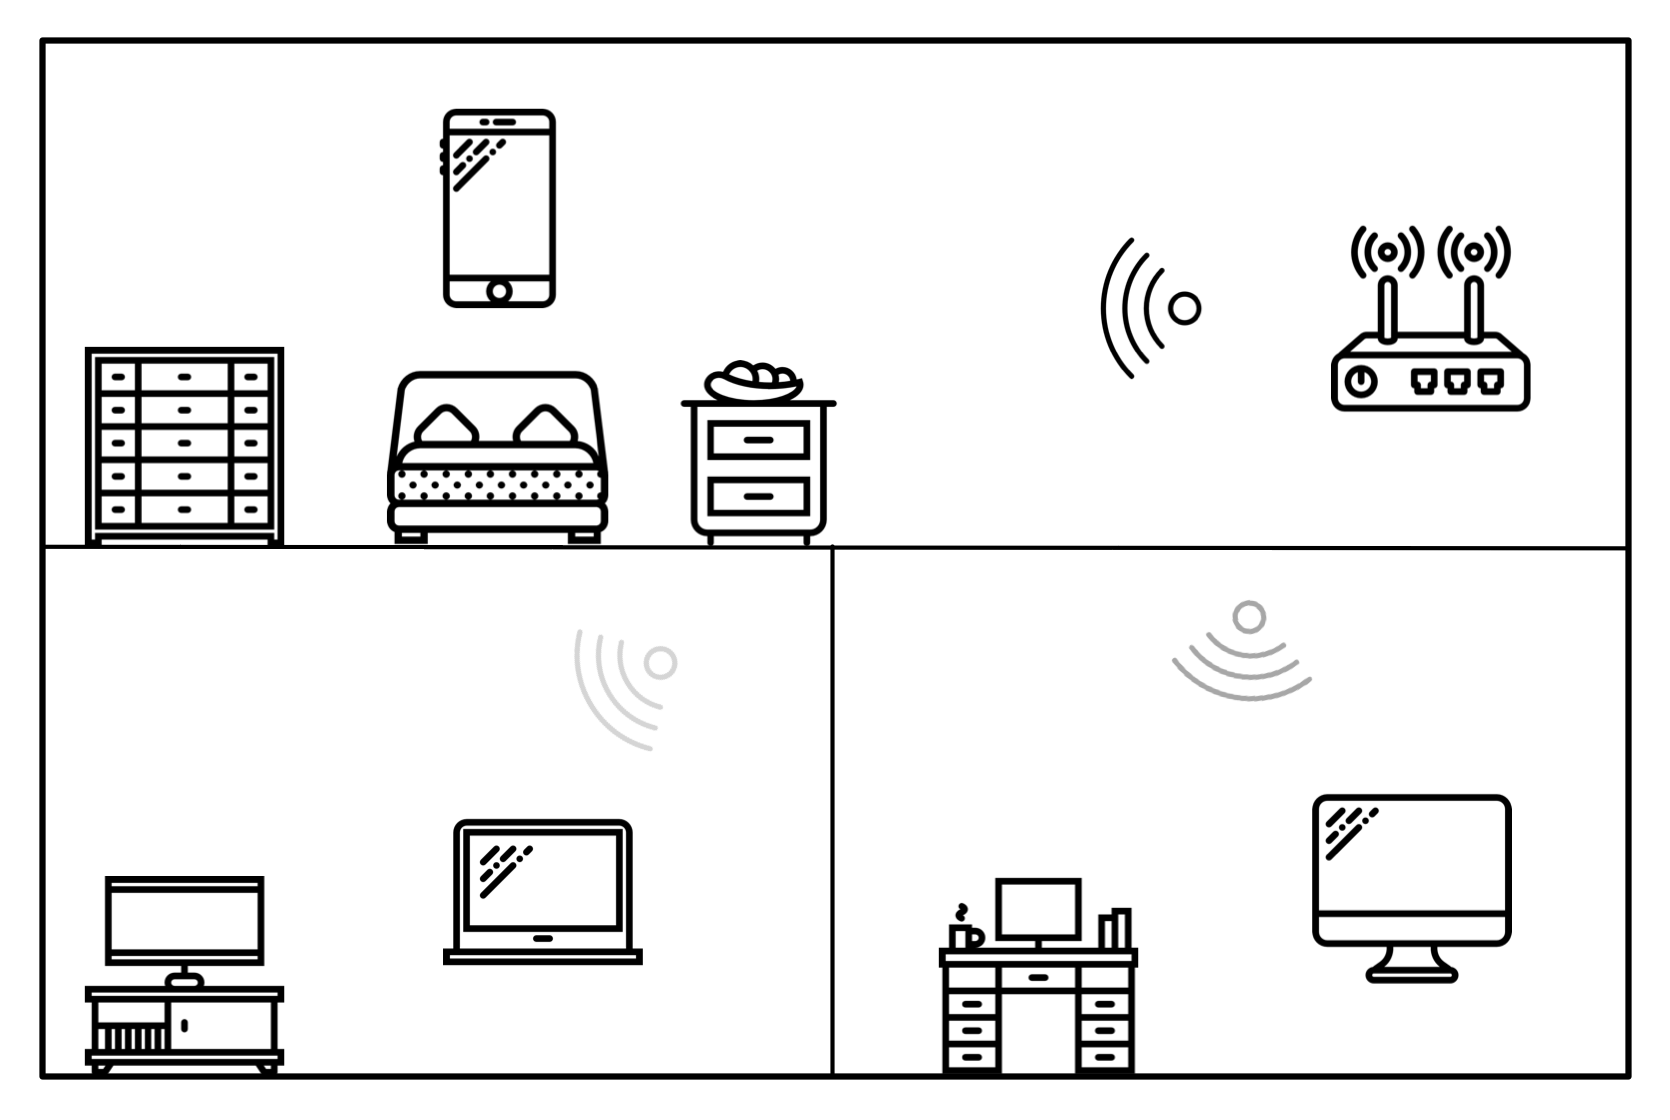 Figure 6: Wi-Fi signals pass through walls and floors more weakly than they do through open space.